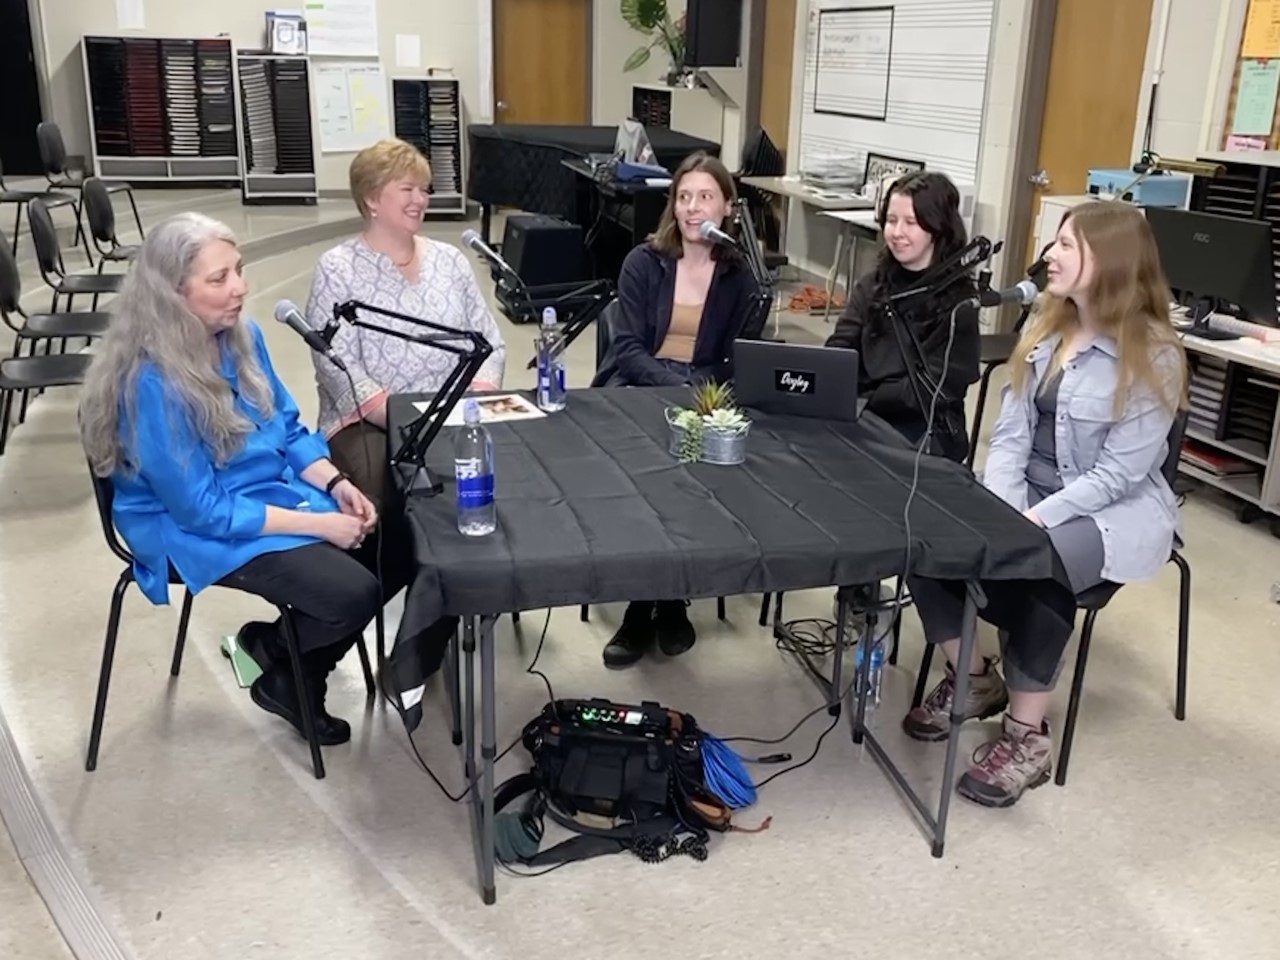 In a high school band room, five people sit around a small table covered with a black cloth. Microphones are attached to the table for each person.